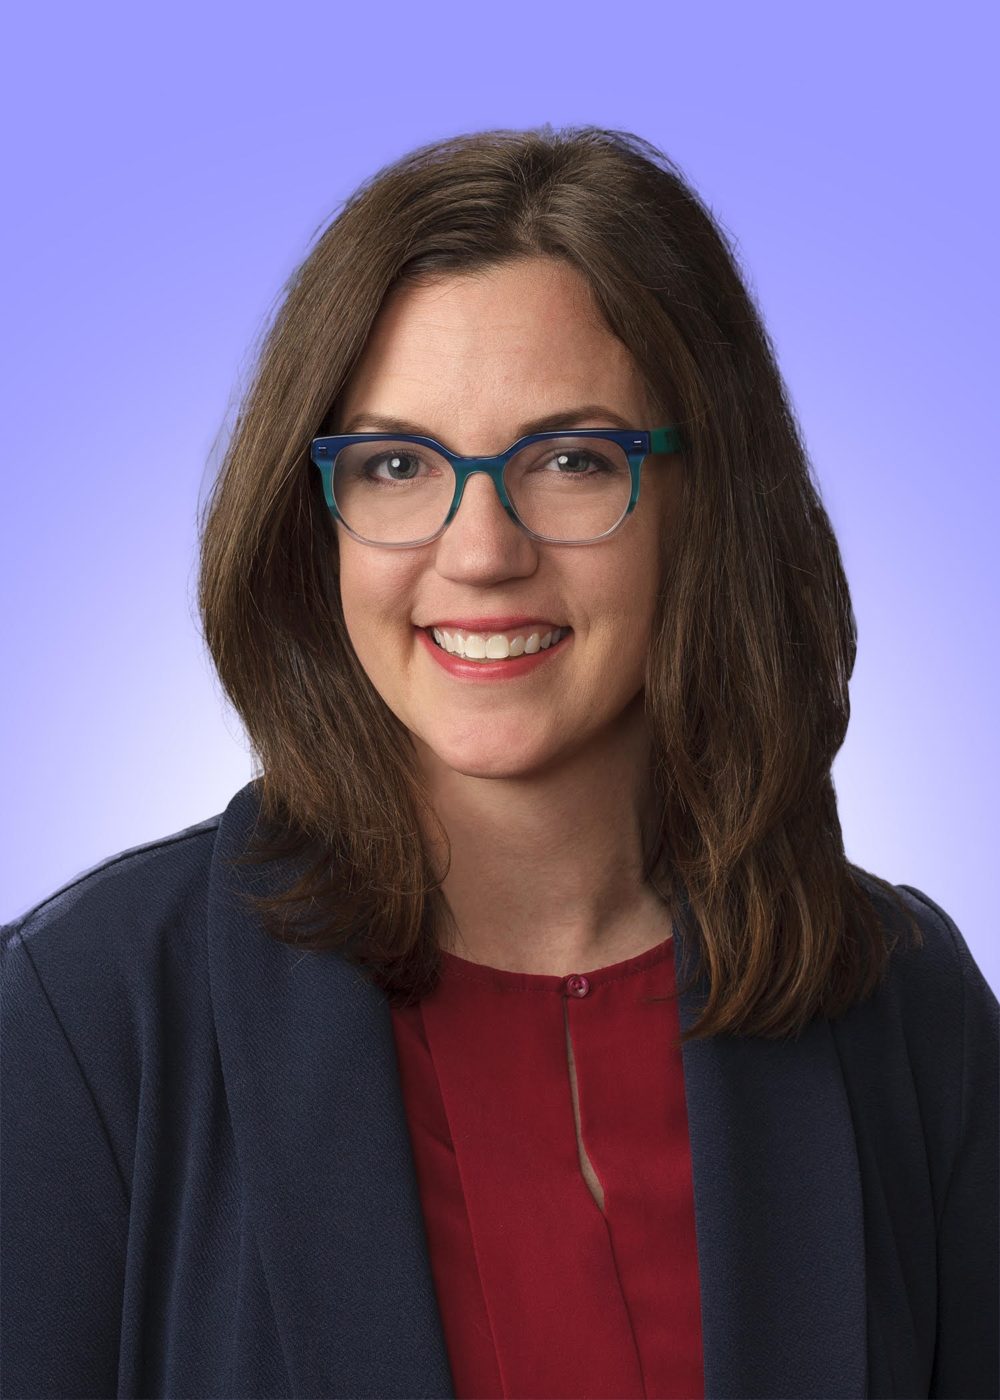 Headshot of woman with brown hair and glasses and red shirt and blue blazer